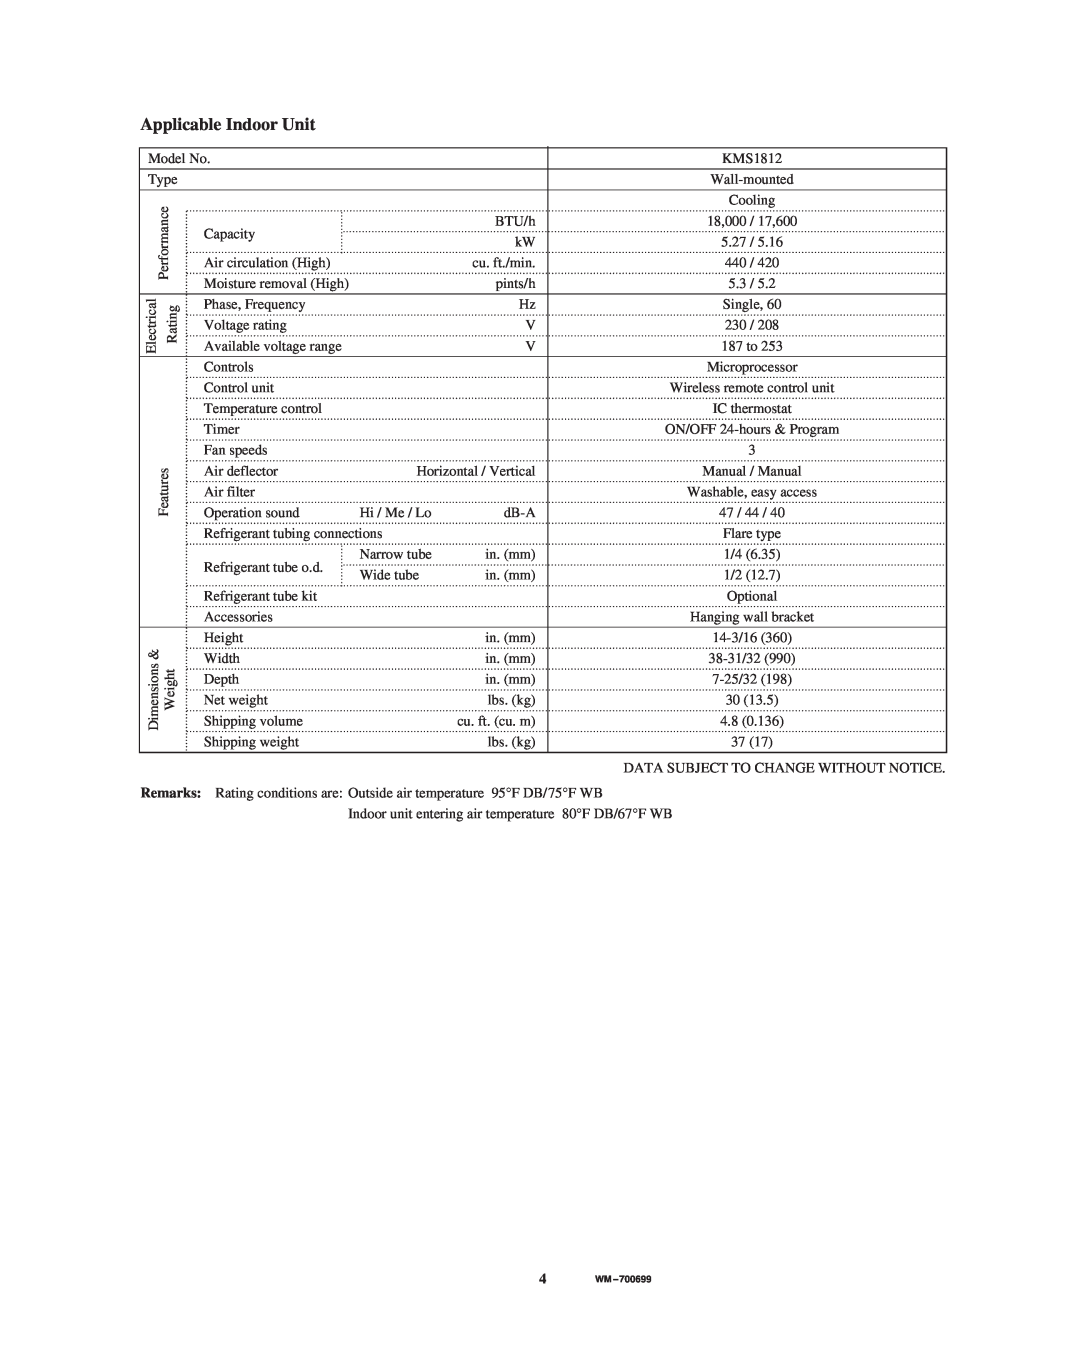 Sanyo KMS0712, CM3212, KMS1812 service manual Applicable Indoor Unit, Model No Type 